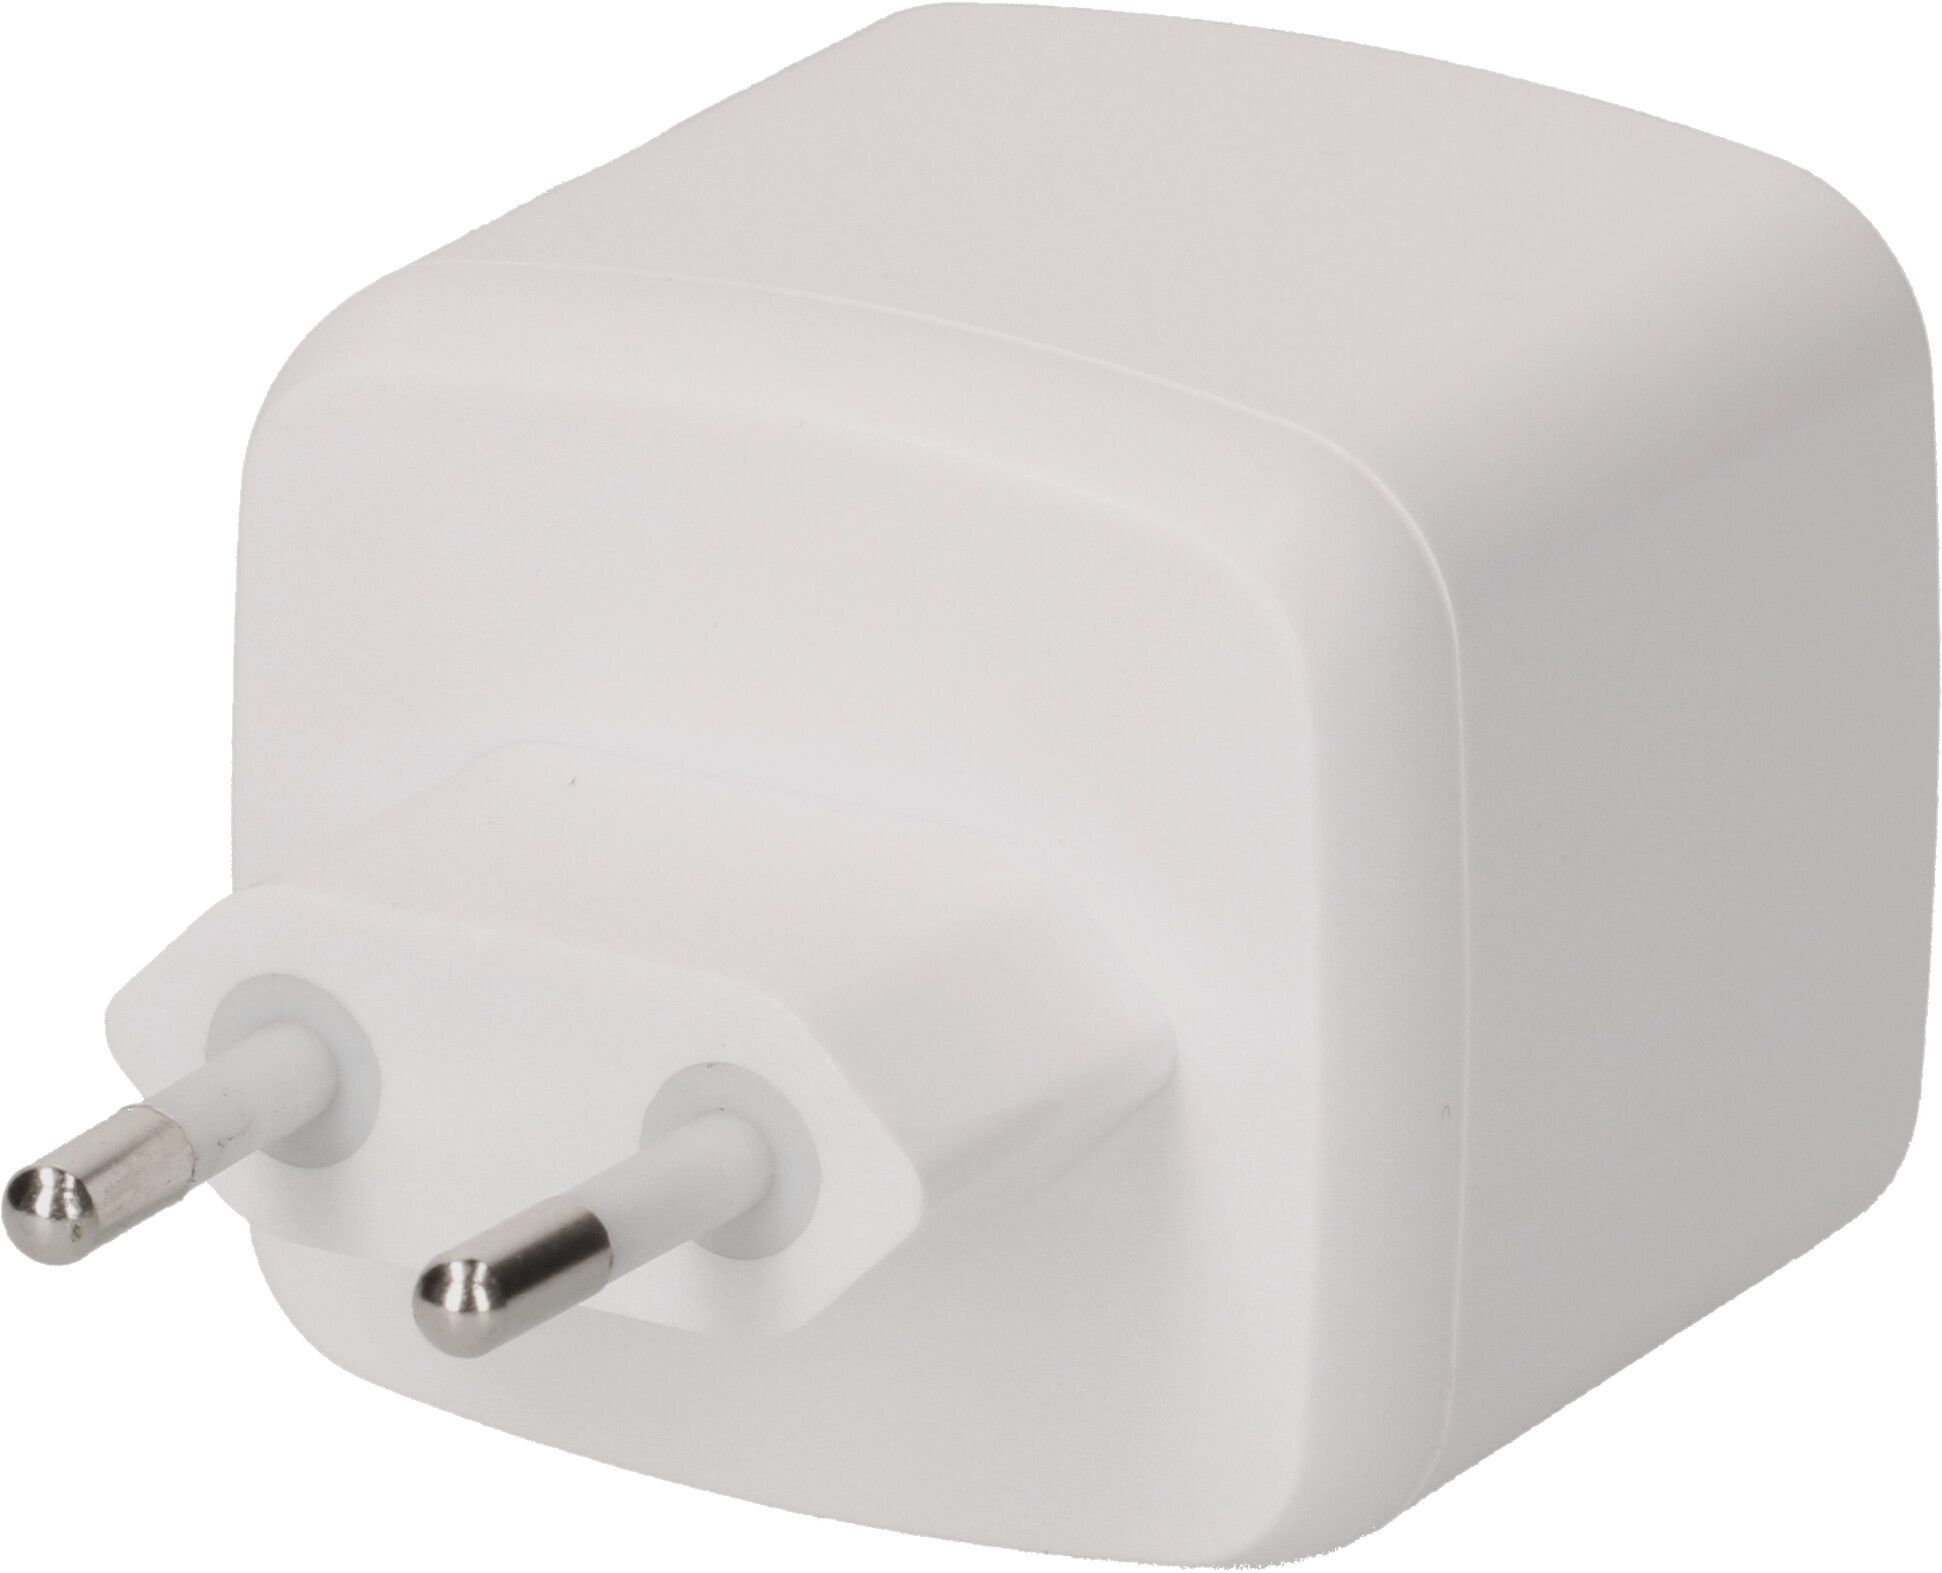 USB Charger USB A/C 45W white